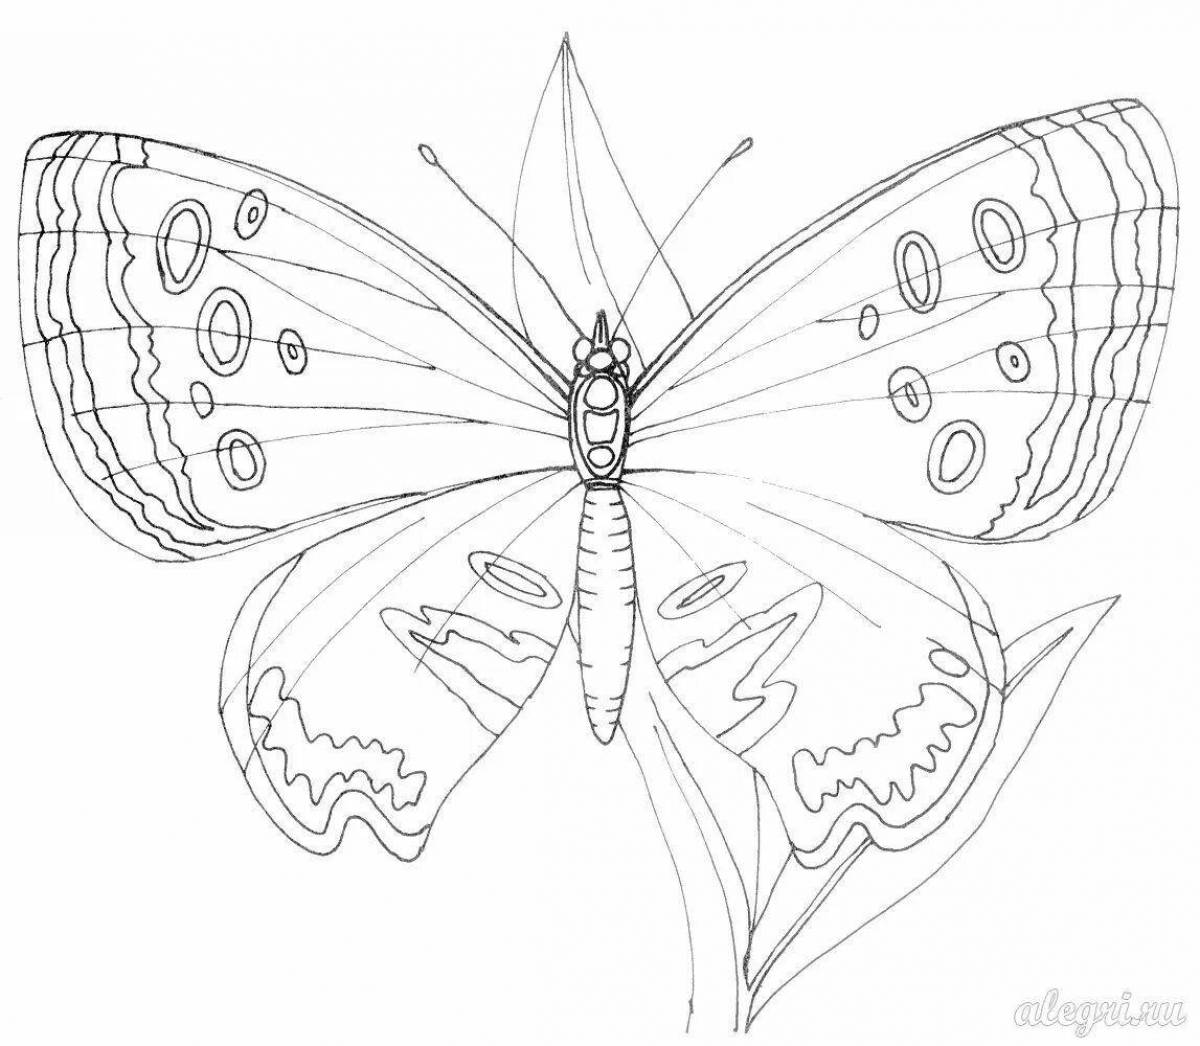 Elegant apollo butterfly coloring book